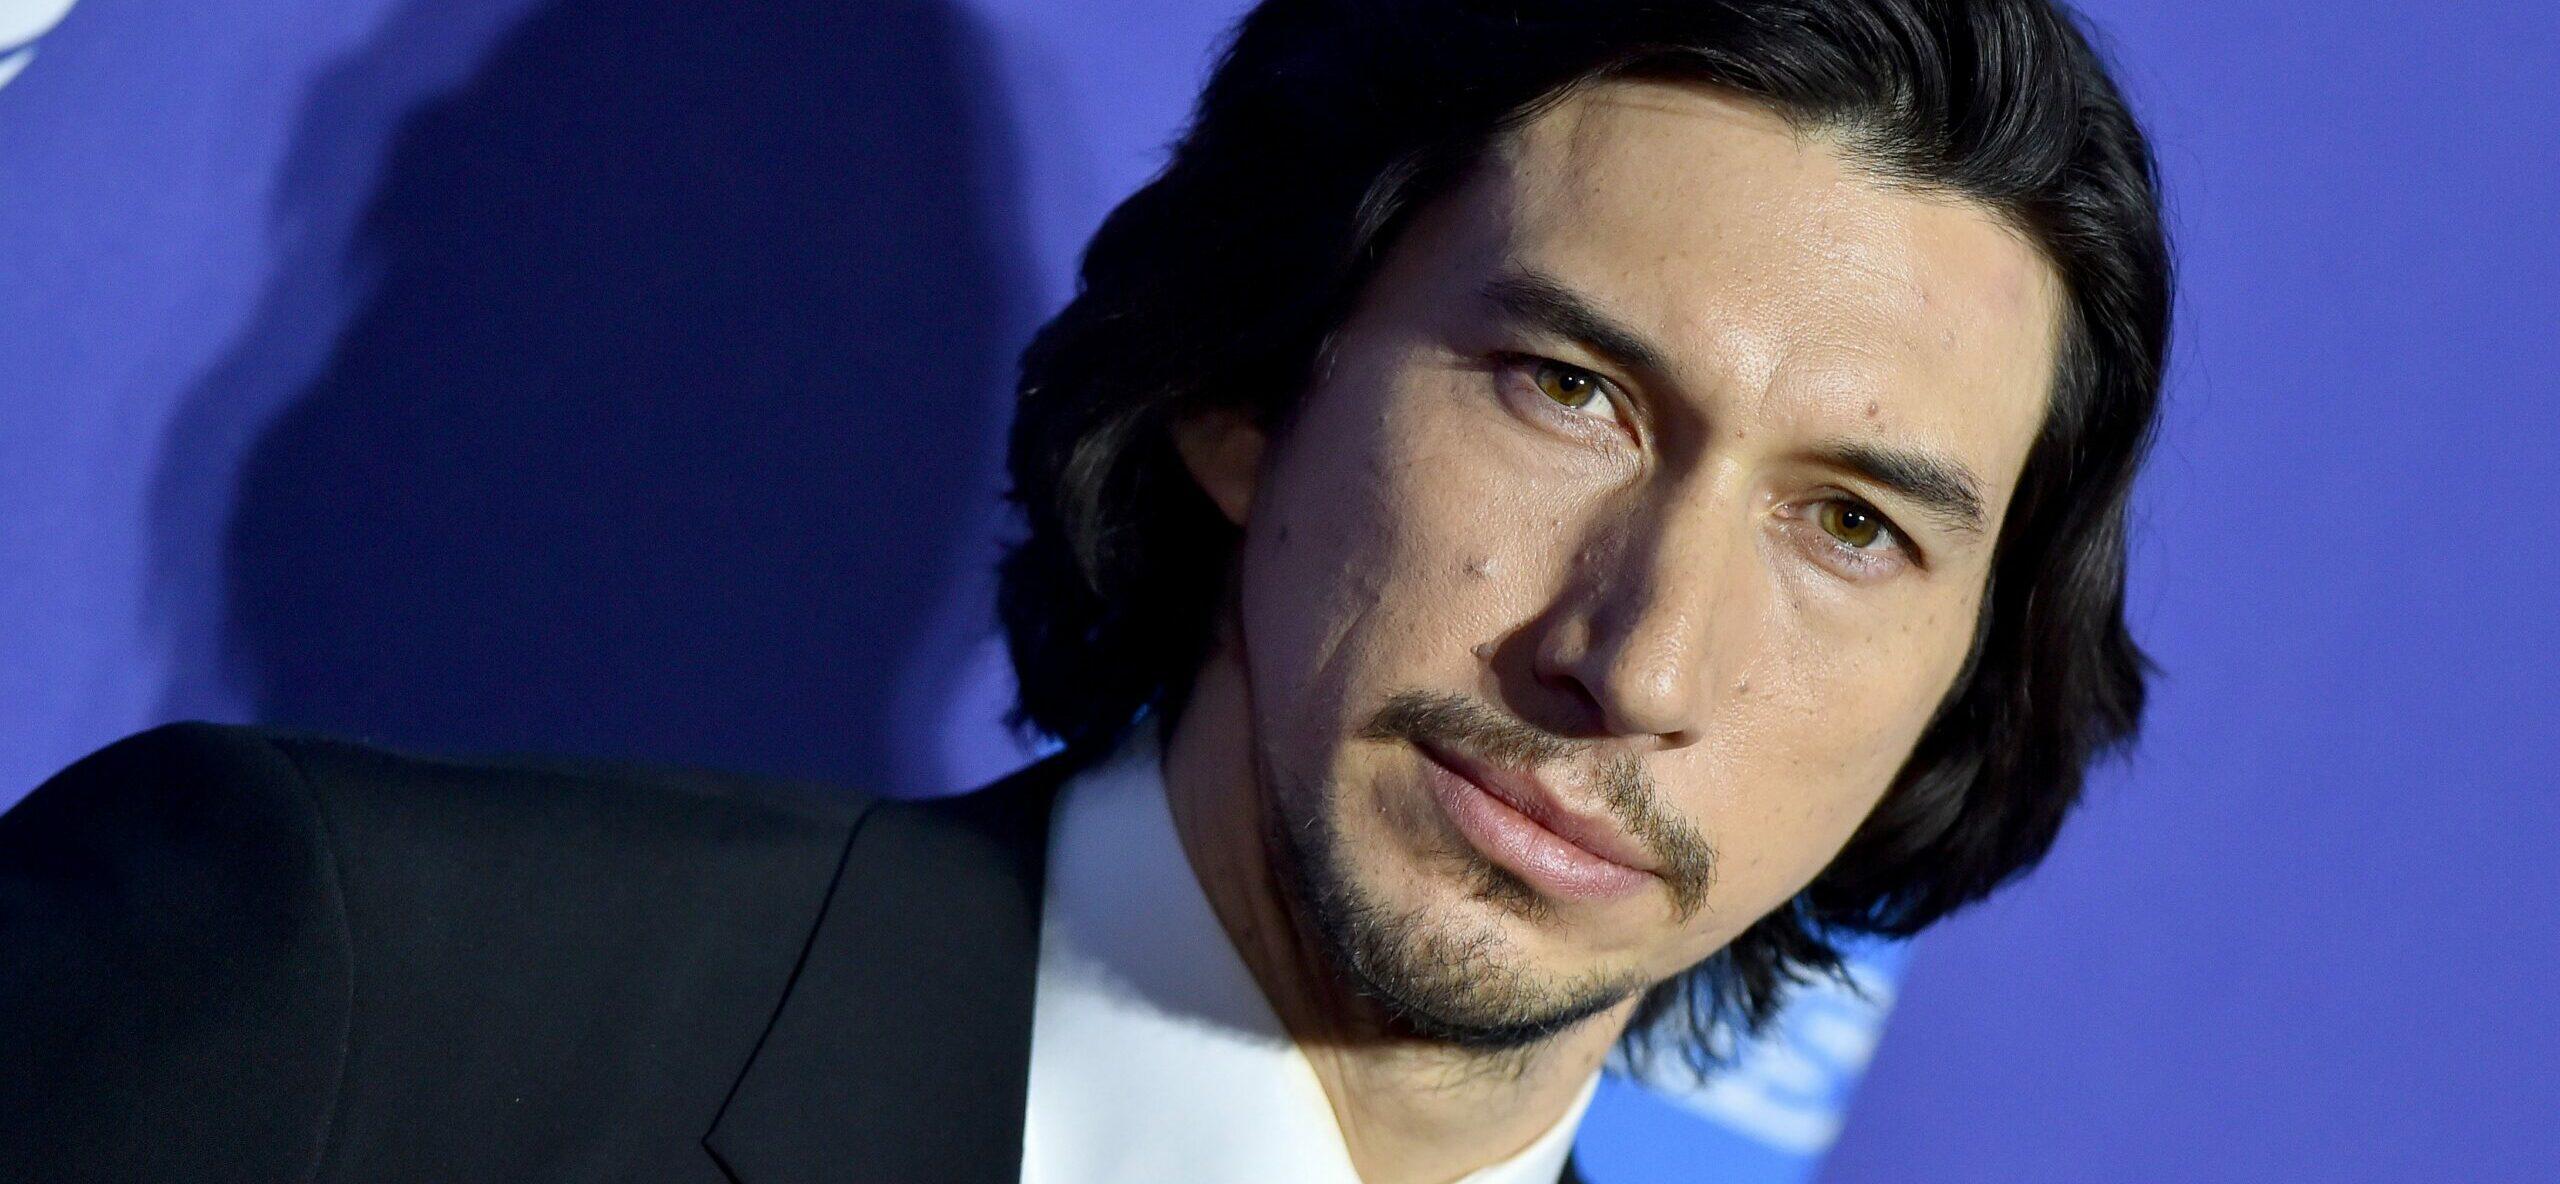 Adam Driver Says ‘Silence’ Was More ‘Physically Demanding’ Than ‘65’